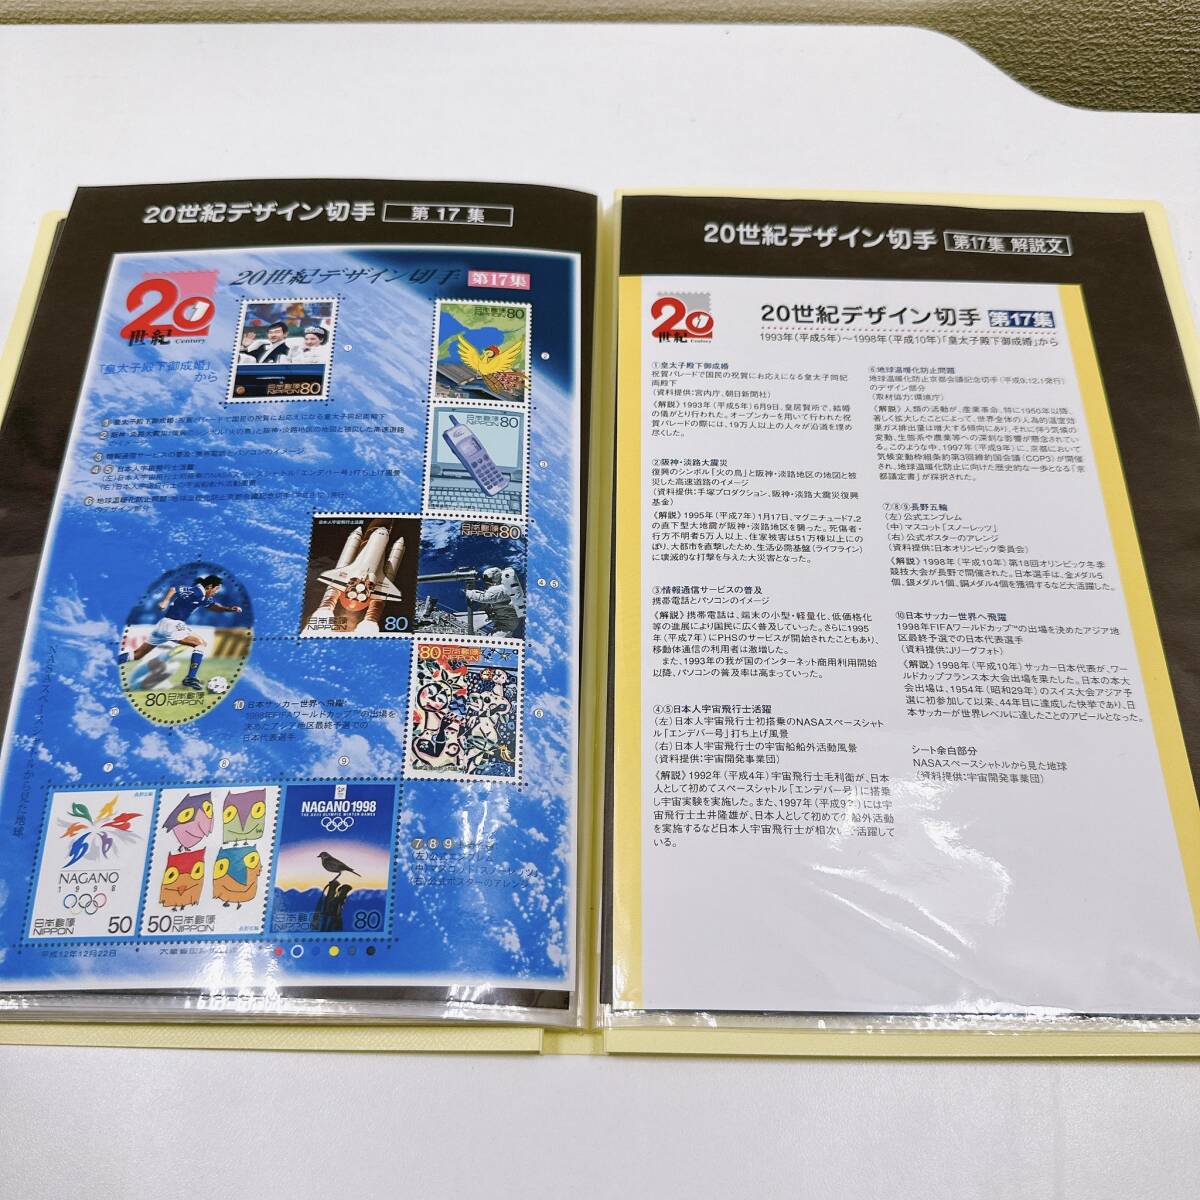 [ART-5572] 1 jpy ~ 20 century design stamp 1 compilation ~17 compilation Complete face value 12580 jpy extra attaching stamp mail collection album completion goods present condition storage goods 